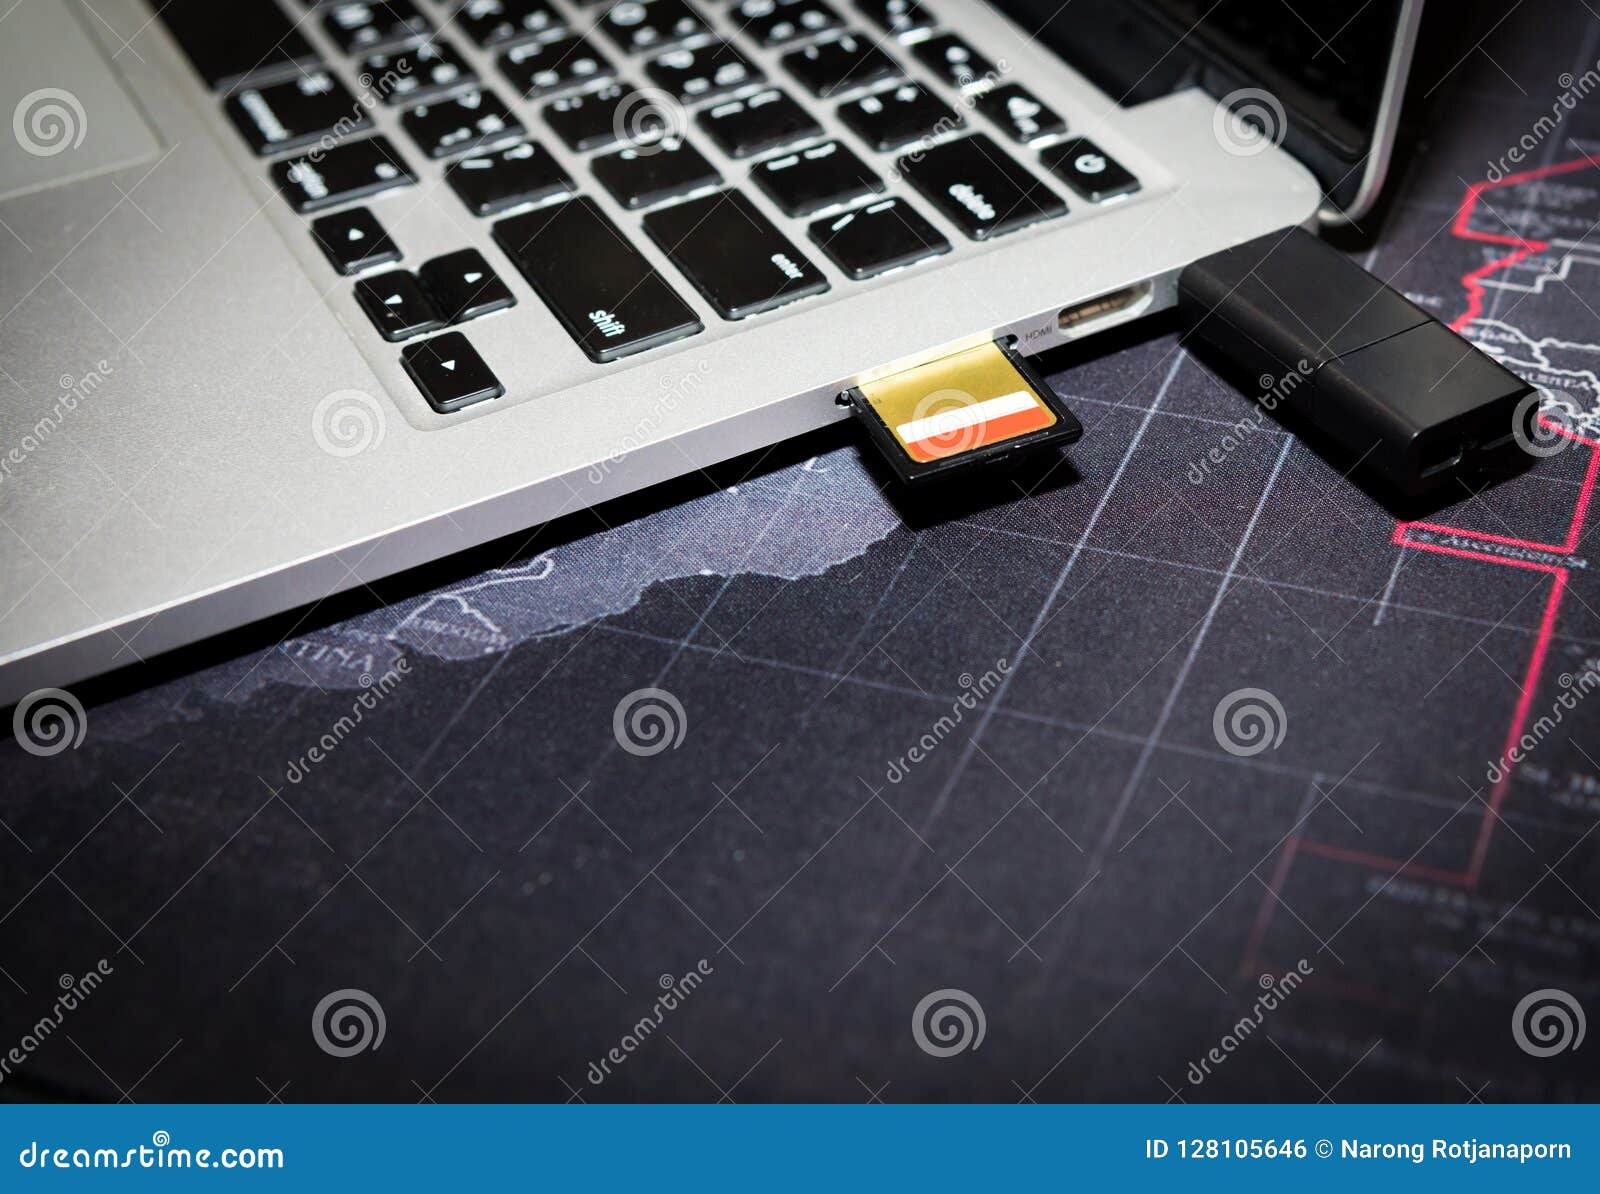 Inserting Sd Card Usb Flash Memory Drive Plugged Into A Computer Laptop Port Stock Photo Image Of Component Internet 128105646